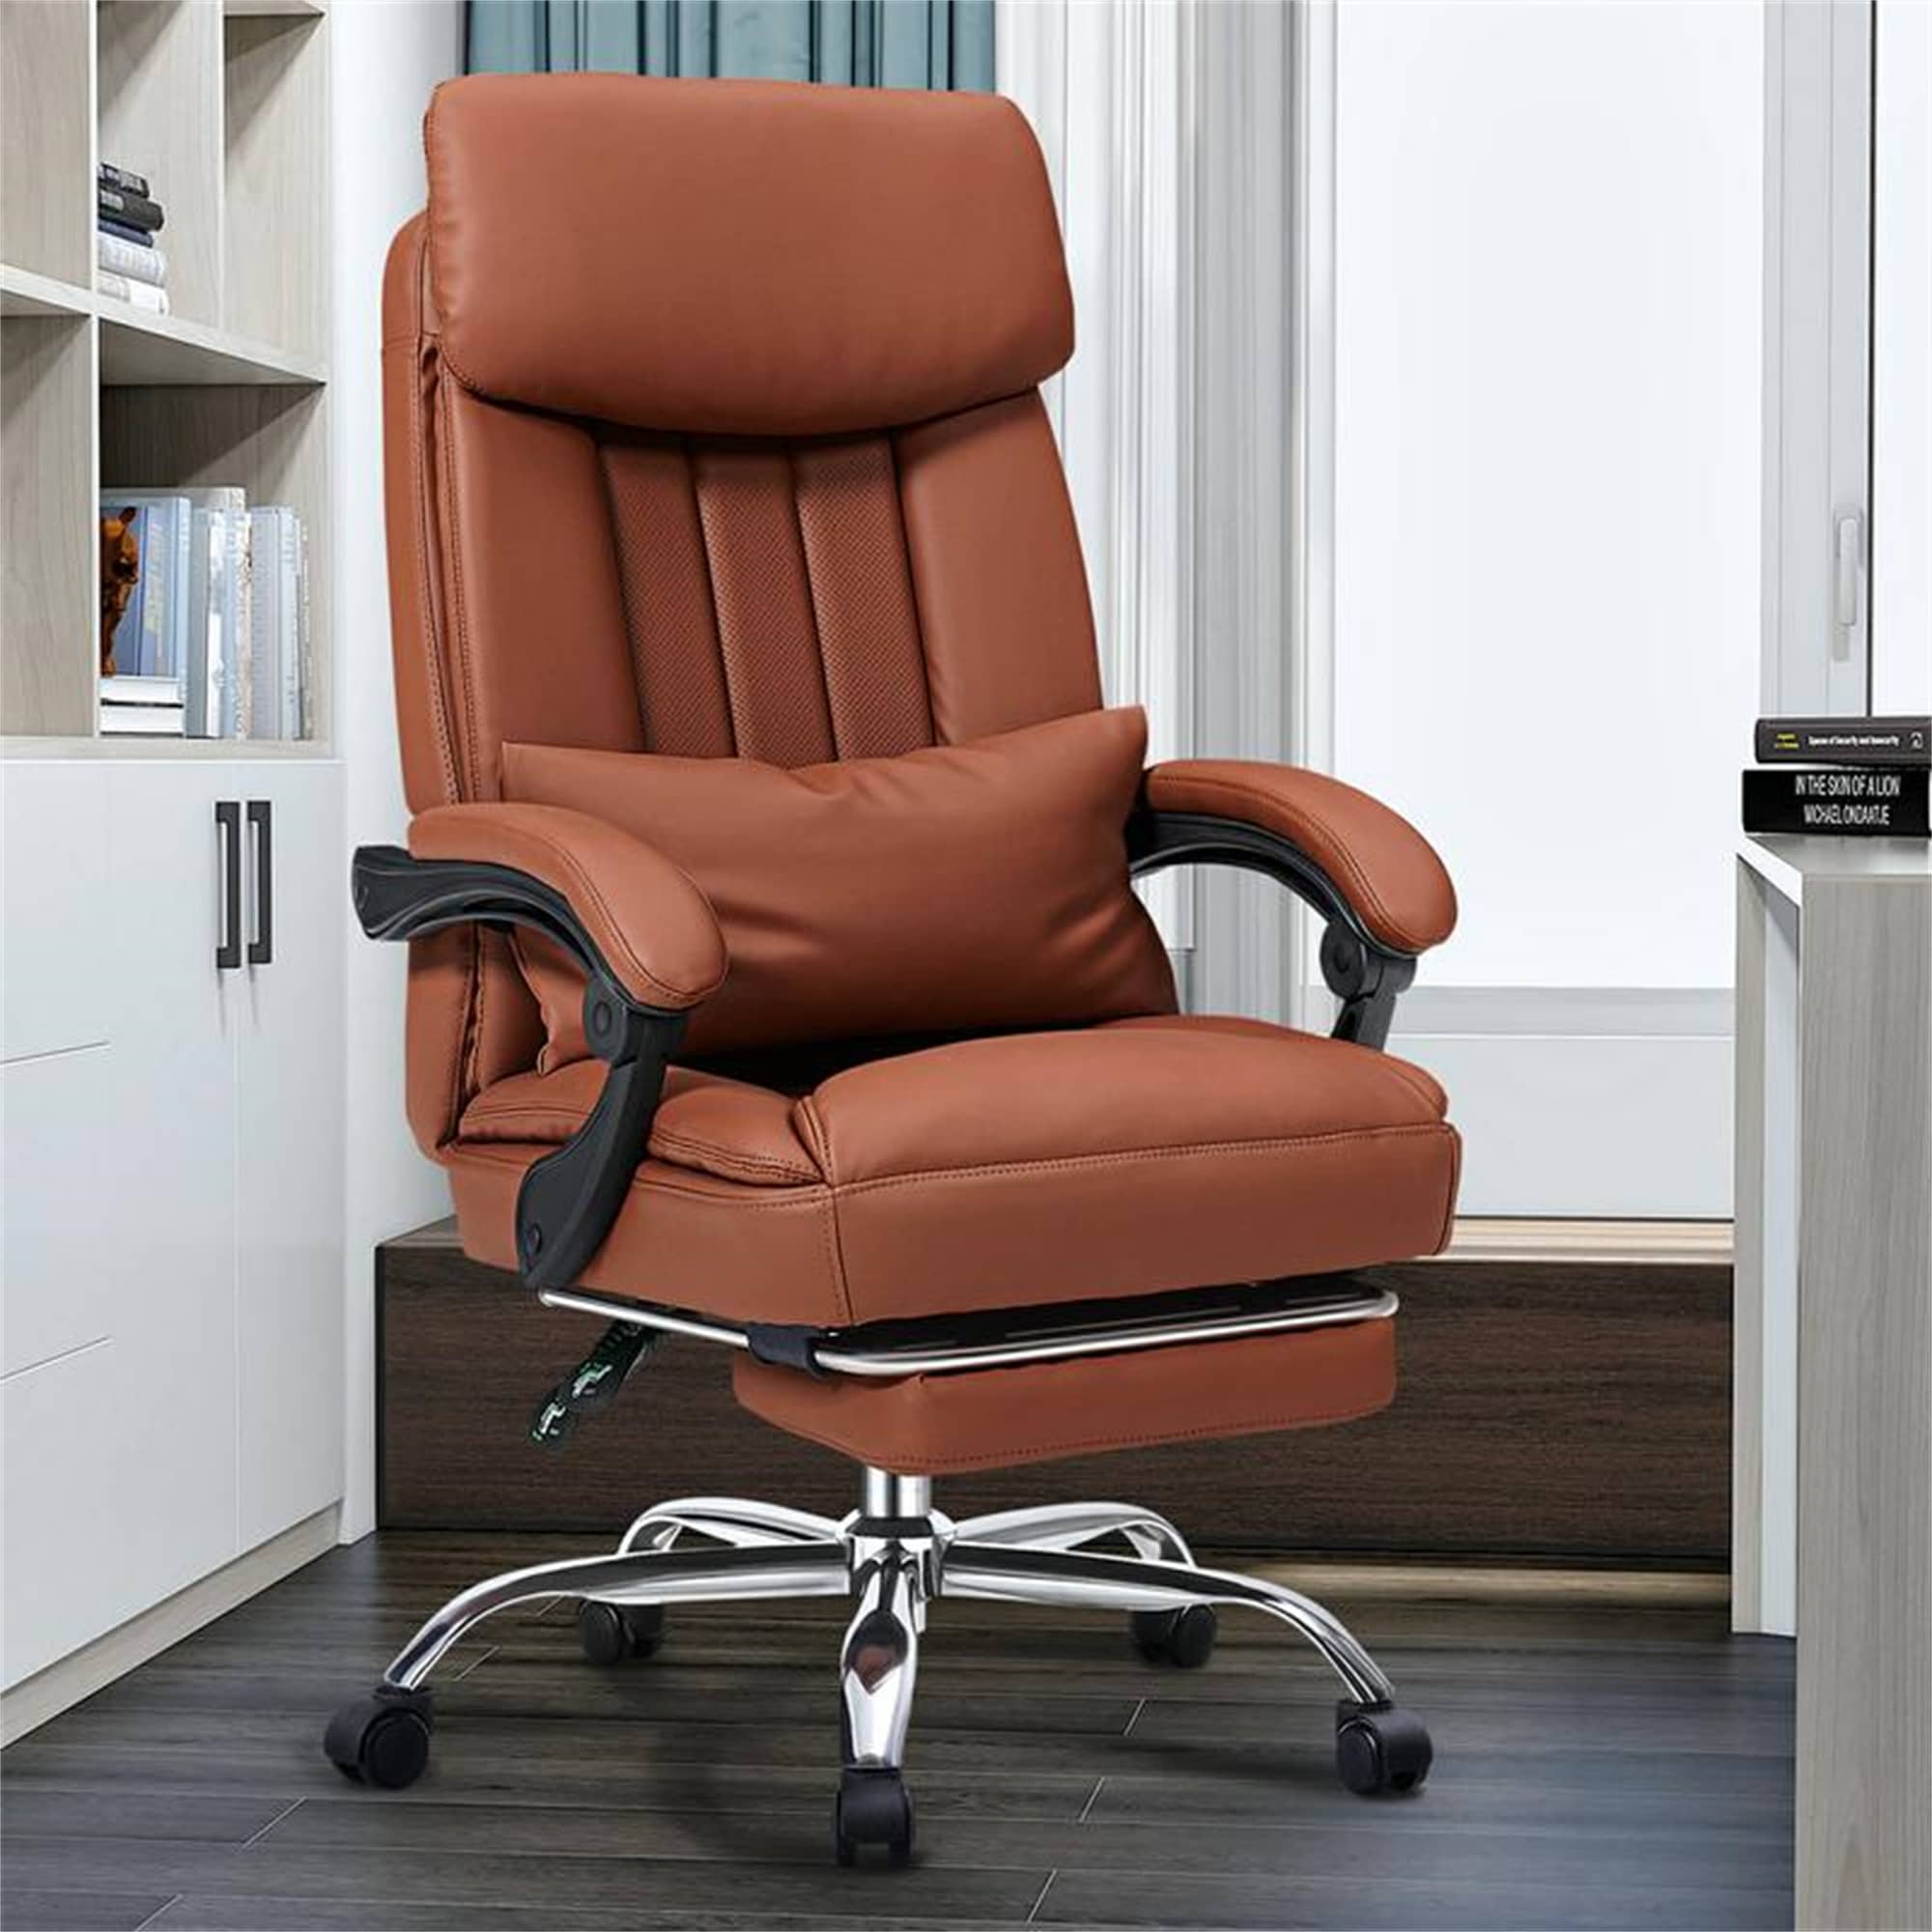 https://ak1.ostkcdn.com/images/products/is/images/direct/6836c6d0649824a687f7bd31158b55e08d82e509/Executive-Chair%2C-High-Back-Leather-Desk-Chair-W--Retractable-Footrest.jpg